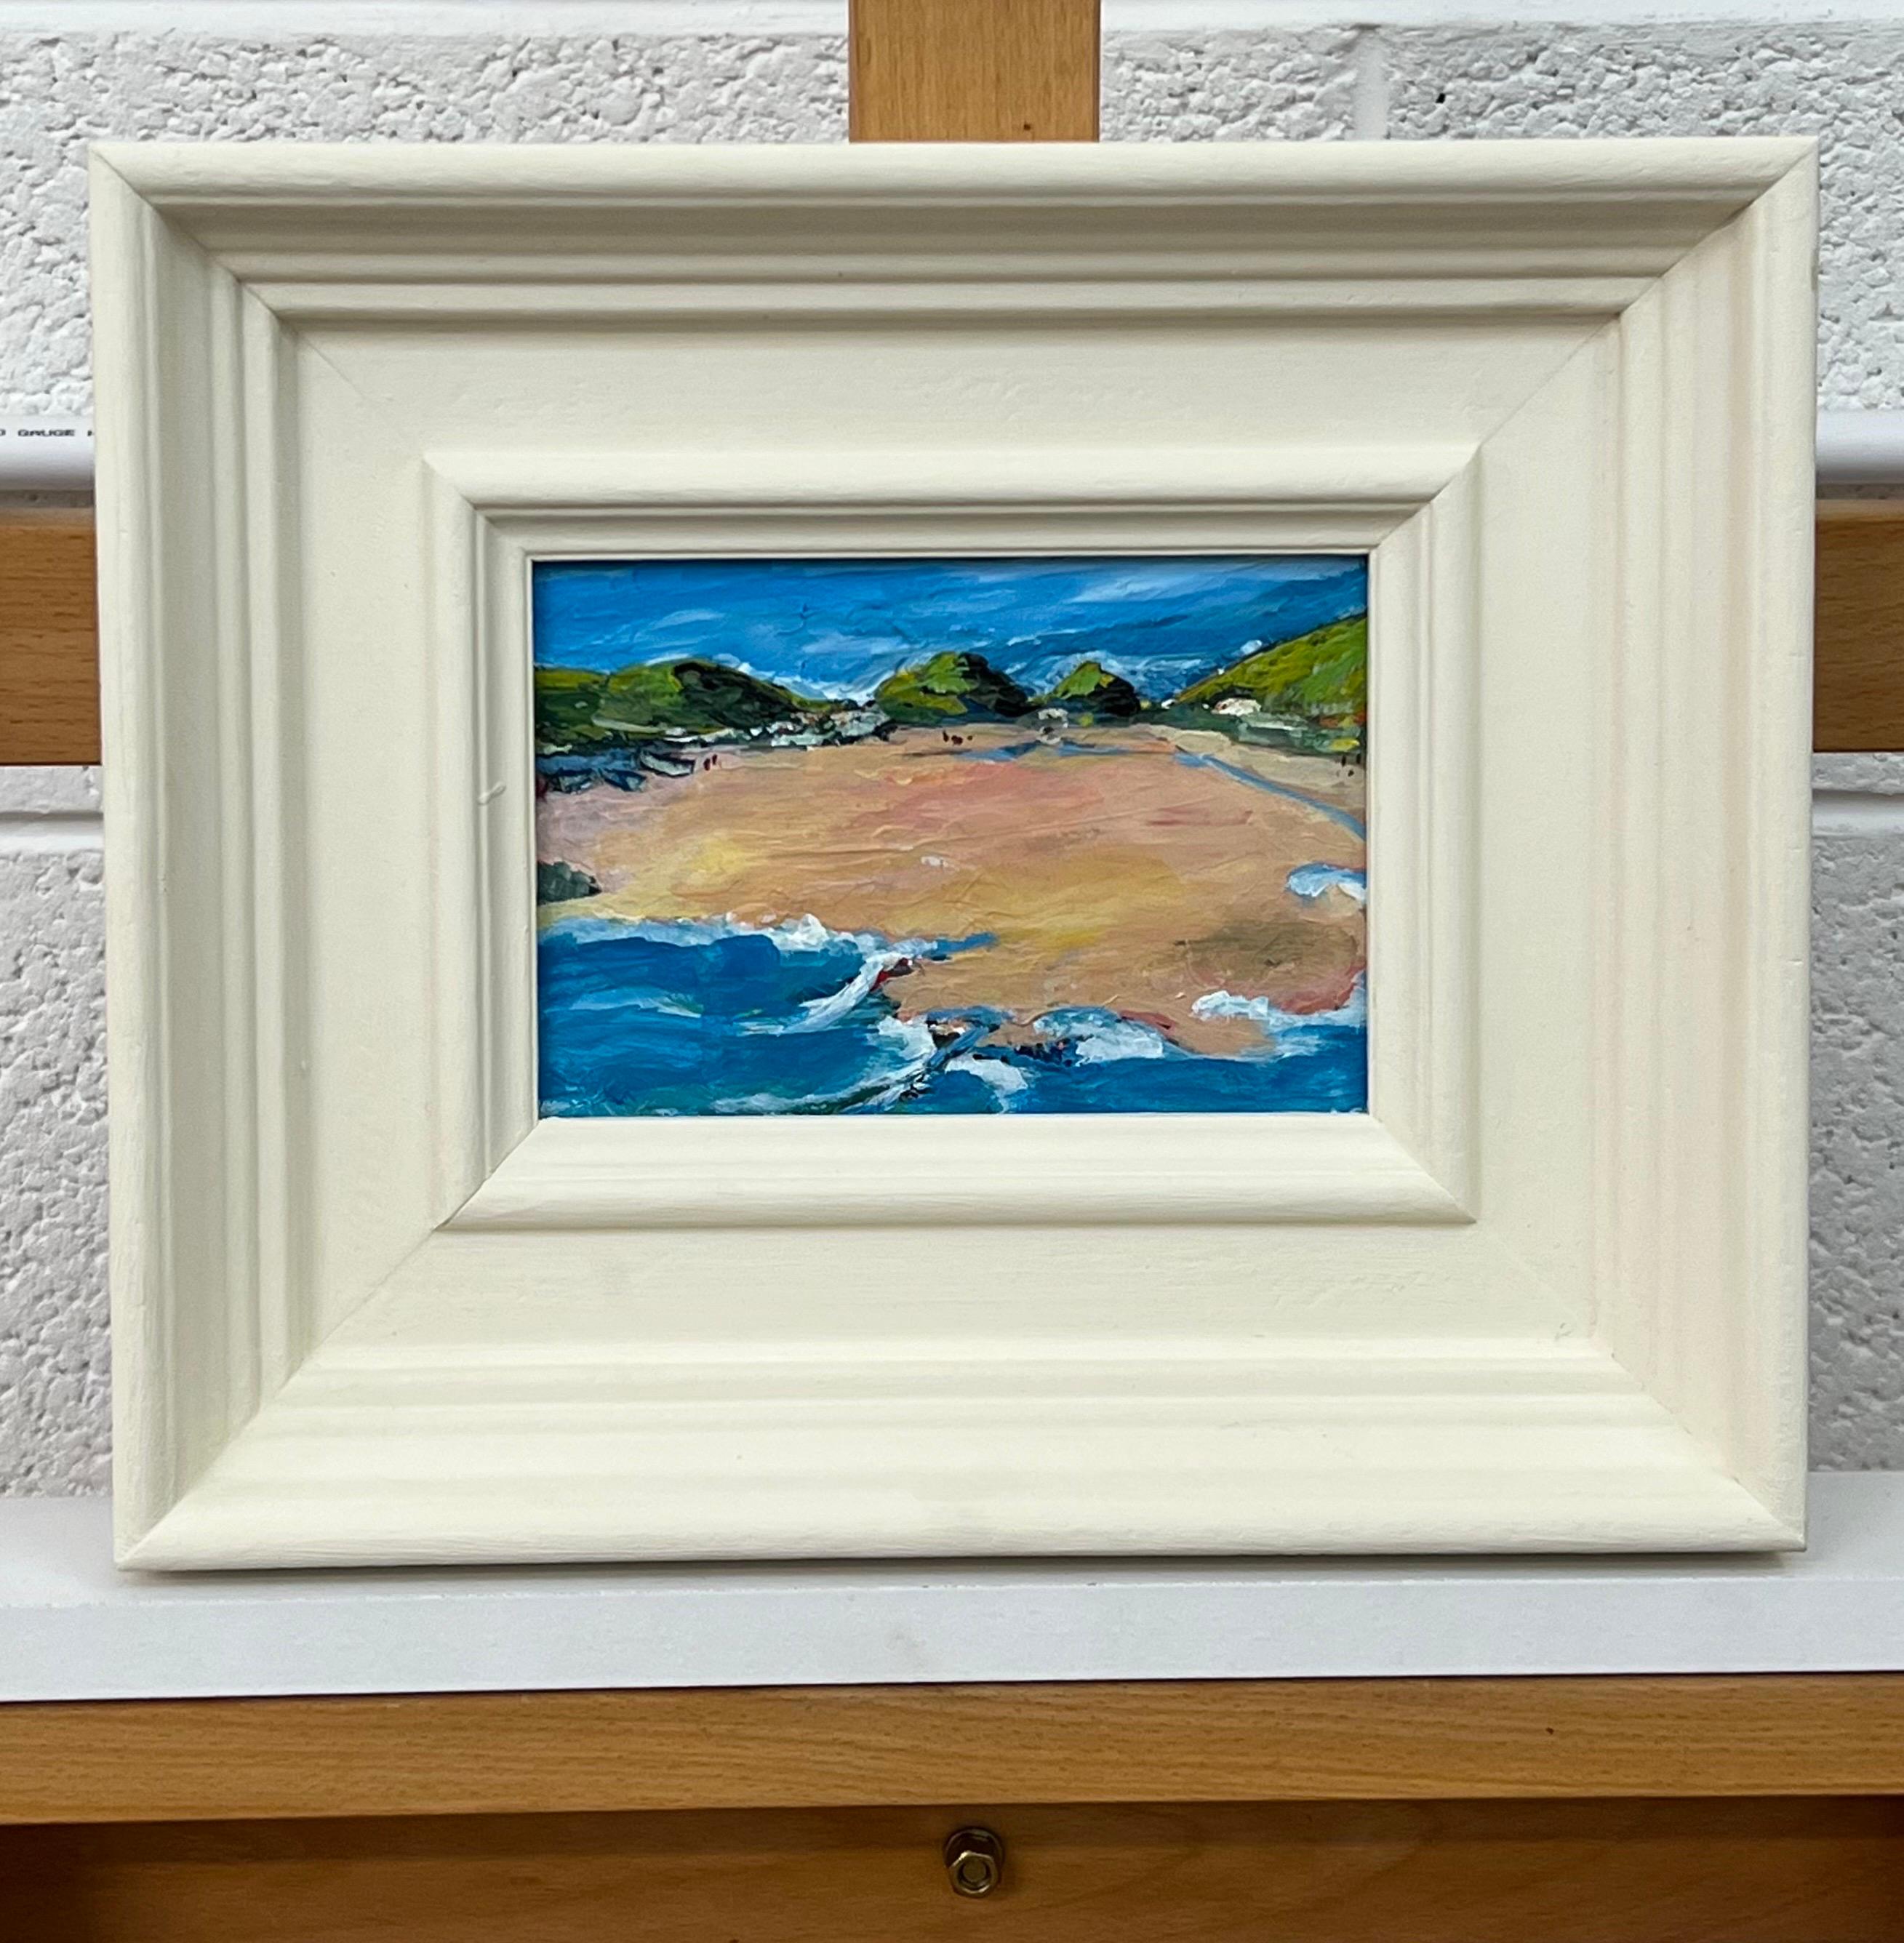 Miniature Landscape Study of Devon Coastline UK by Contemporary British Artist, Angela Wakefield 

Art measures 7 x 5 inches
Frame measures 12 x 10 inches 

Angela Wakefield has twice been on the front cover of ‘Art of England’ and featured in